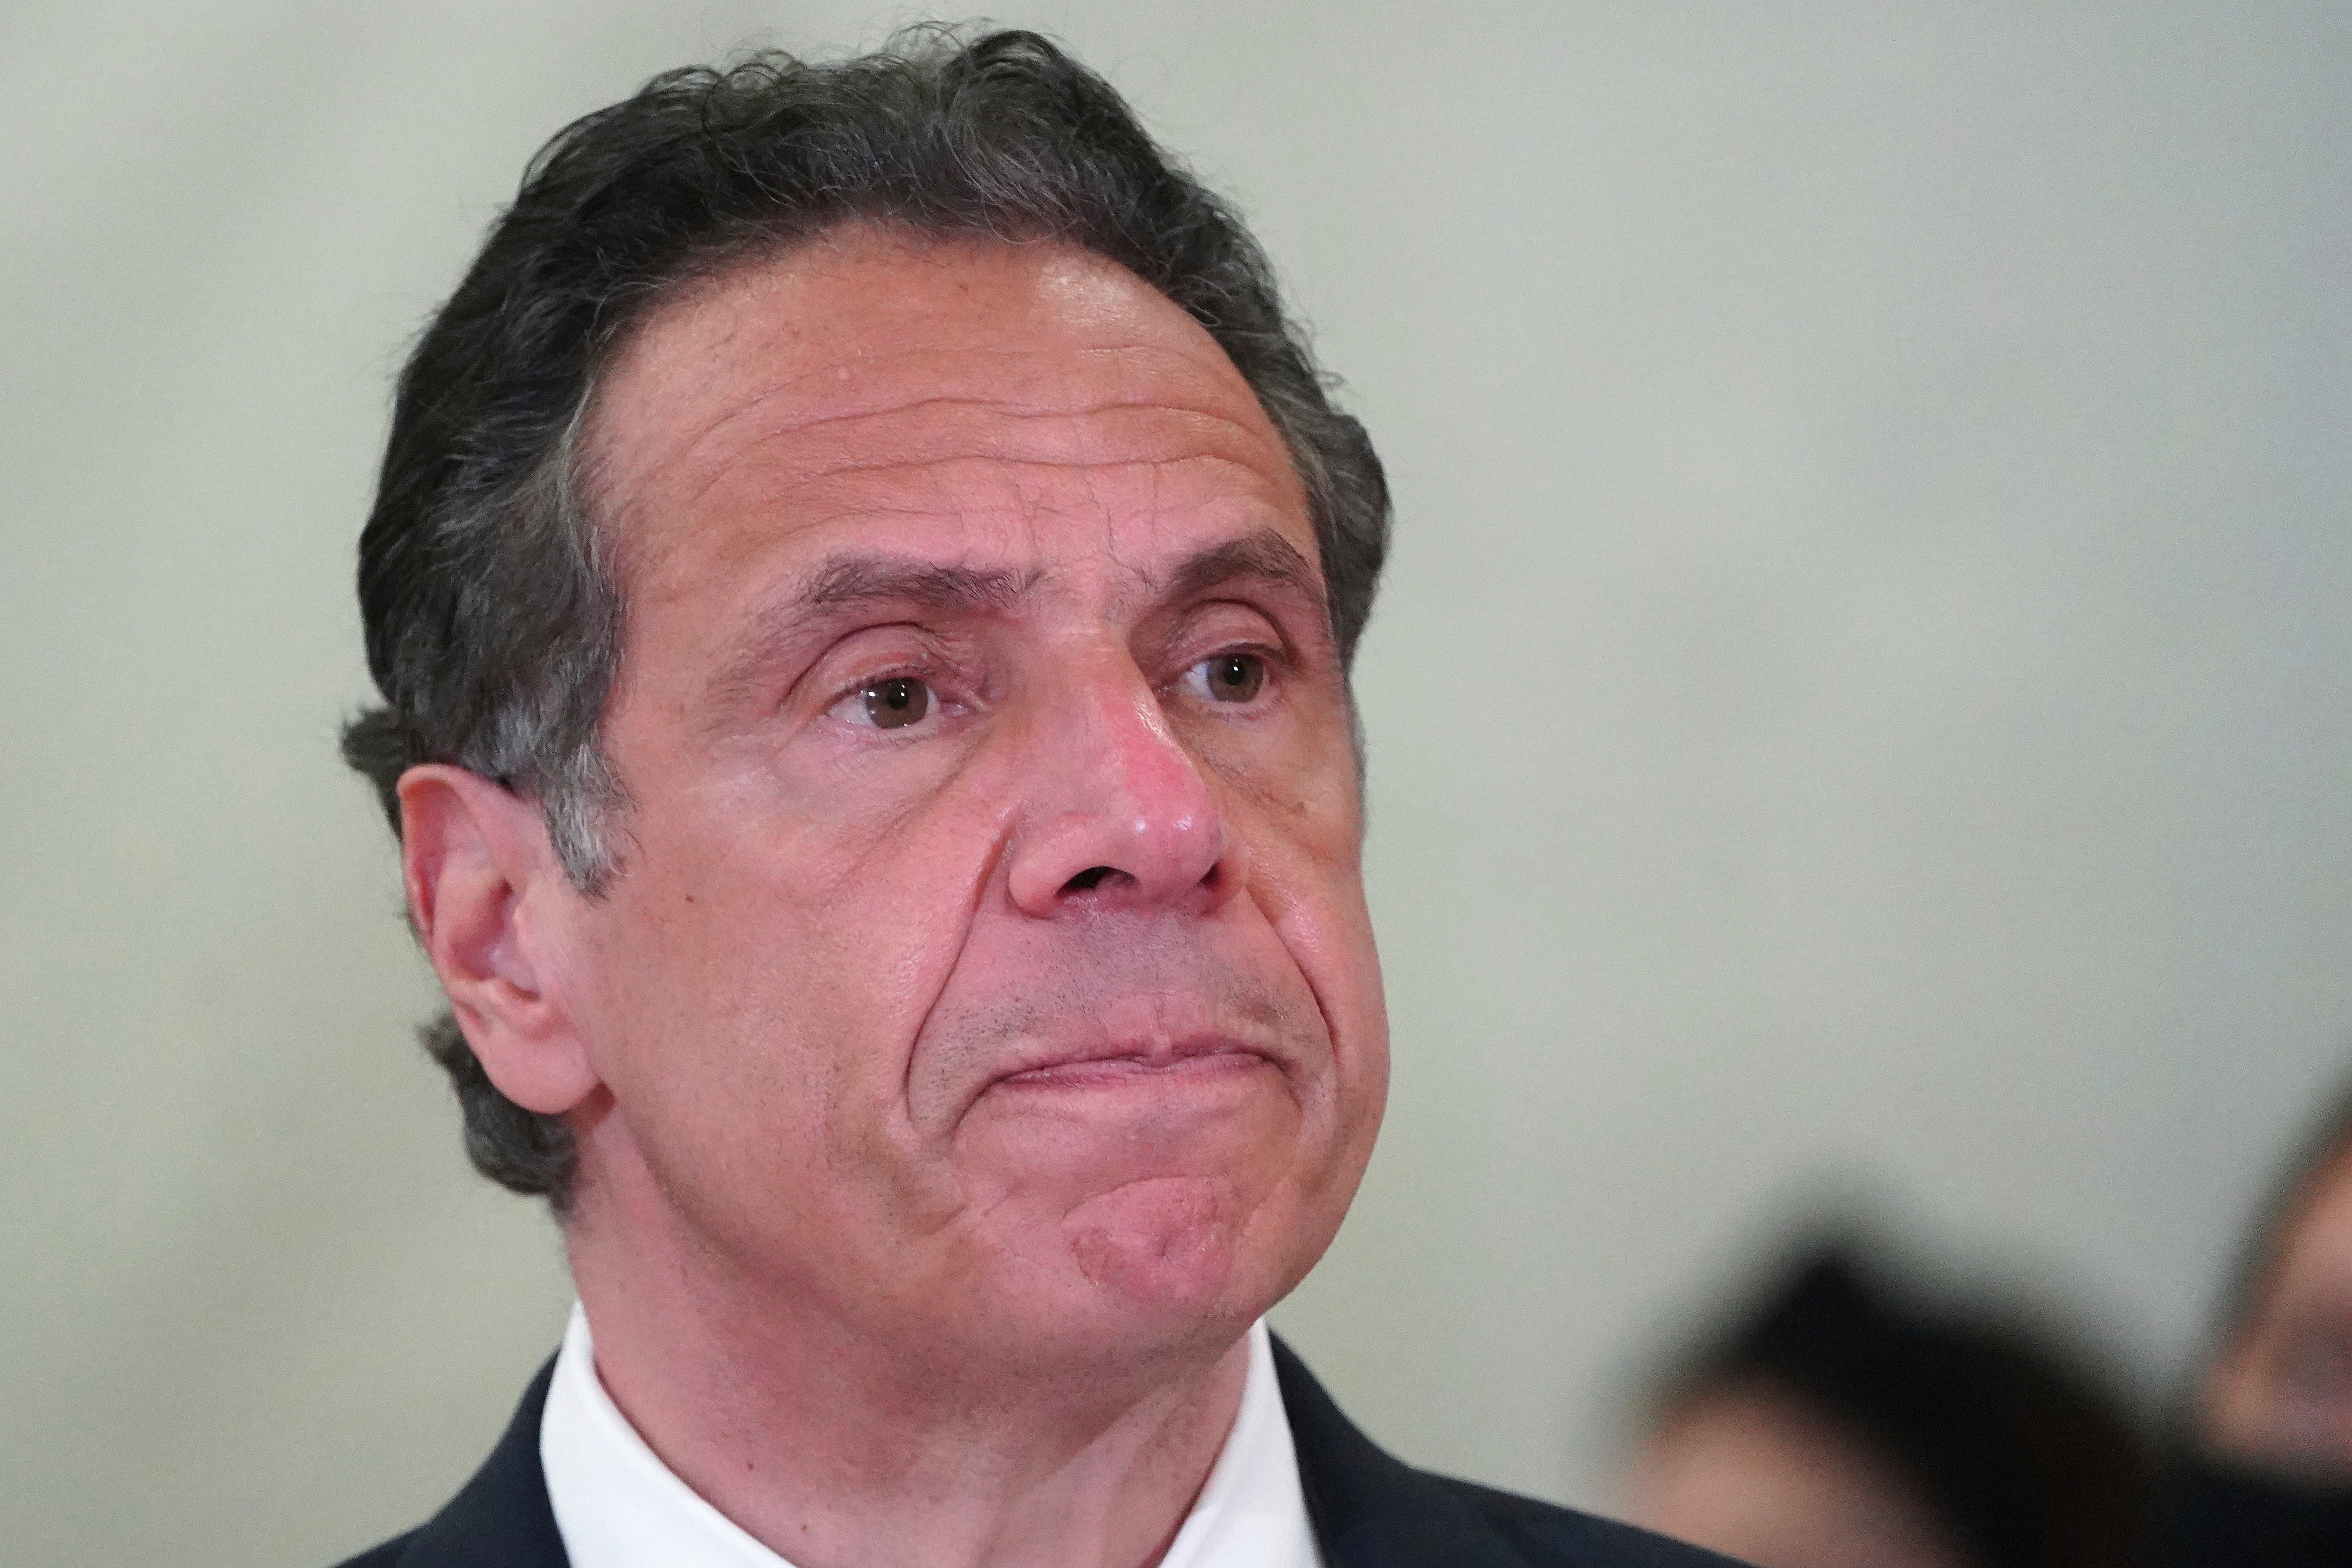 New York Governor Andrew Cuomo has faced multiple scandals over the past year